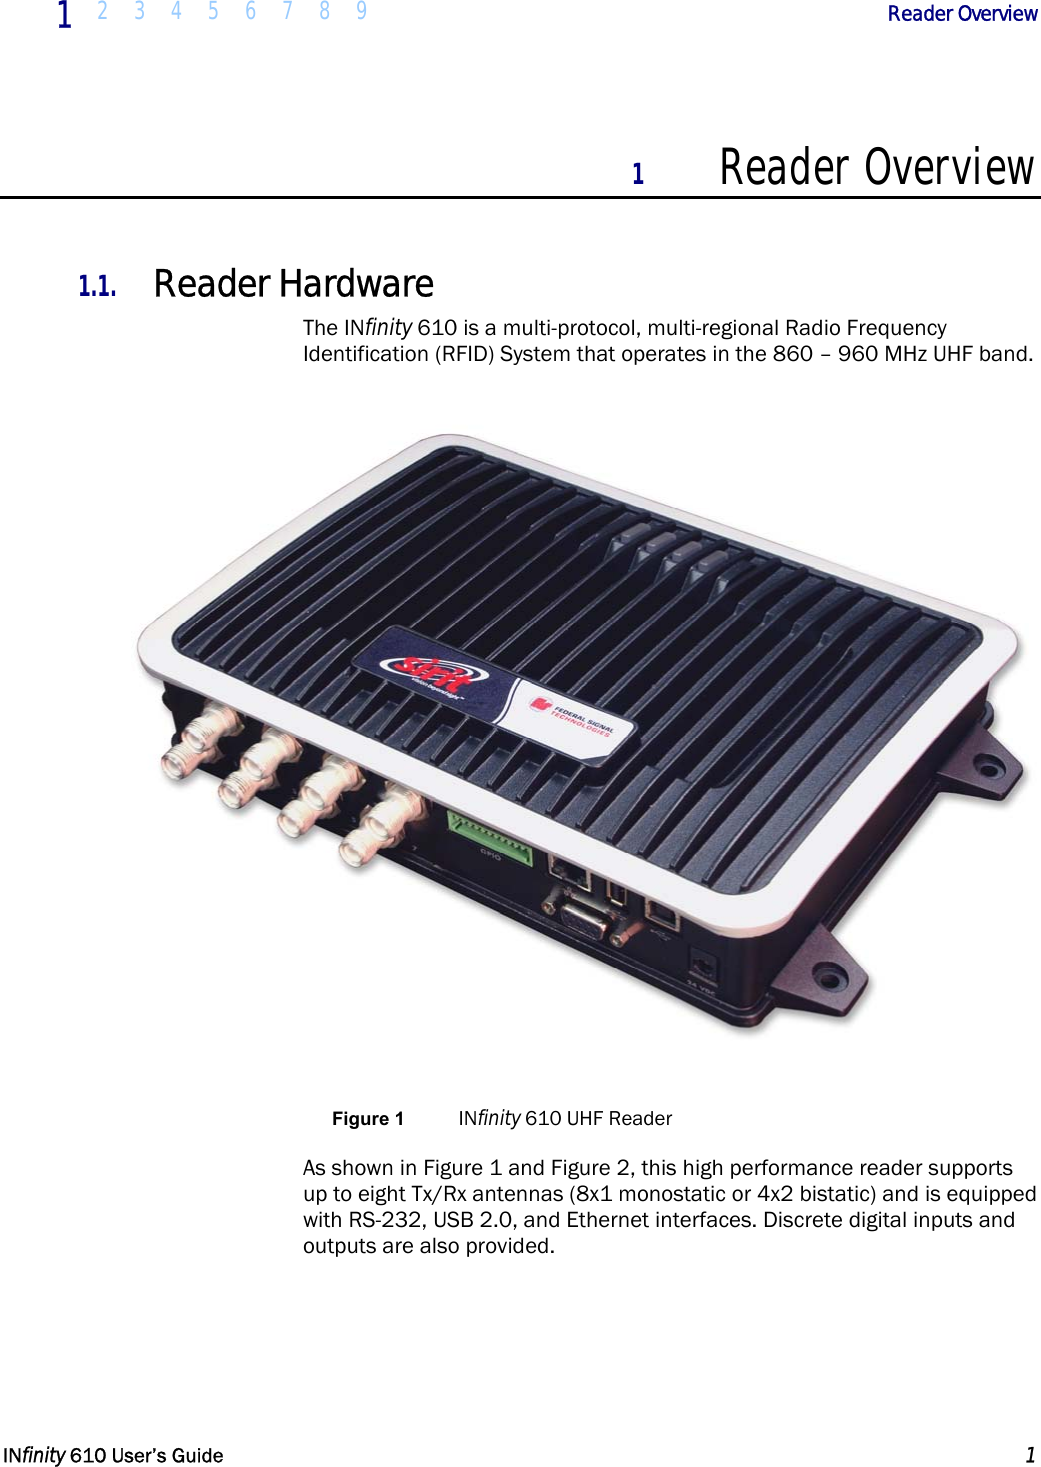  1  2 3 4 5 6 7 8 9             Reader Overview   INfinity 610 User’s Guide  1  1 Reader Overview  1.1. Reader Hardware The INfinity 610 is a multi-protocol, multi-regional Radio Frequency Identification (RFID) System that operates in the 860 – 960 MHz UHF band.   Figure 1  INfinity 610 UHF Reader As shown in Figure 1 and Figure 2, this high performance reader supports up to eight Tx/Rx antennas (8x1 monostatic or 4x2 bistatic) and is equipped with RS-232, USB 2.0, and Ethernet interfaces. Discrete digital inputs and outputs are also provided.  